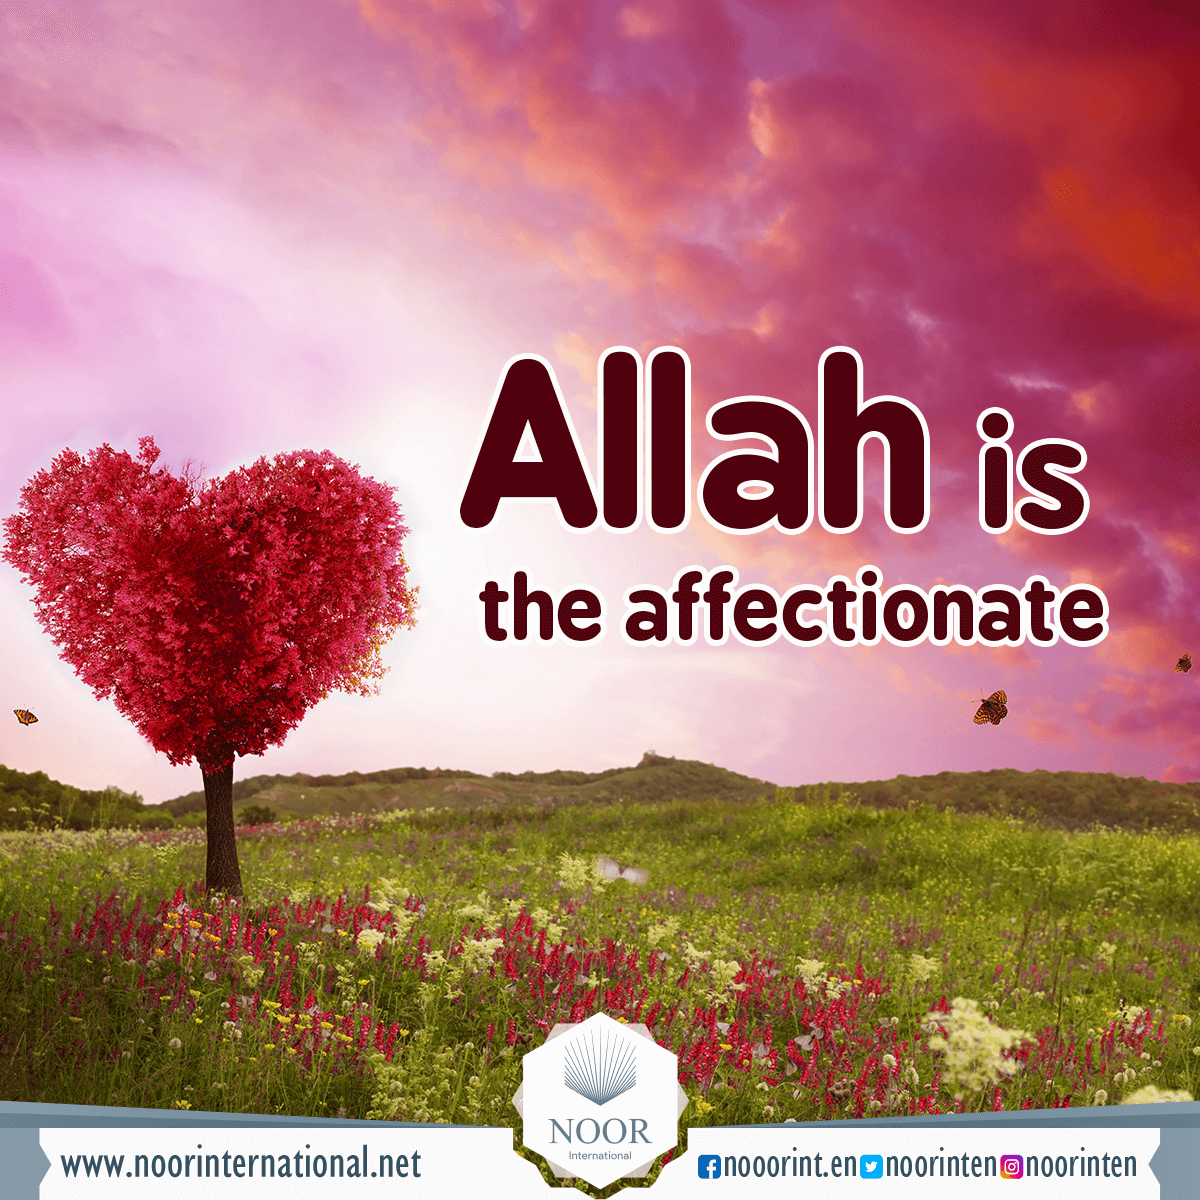 Allah is the affectionate